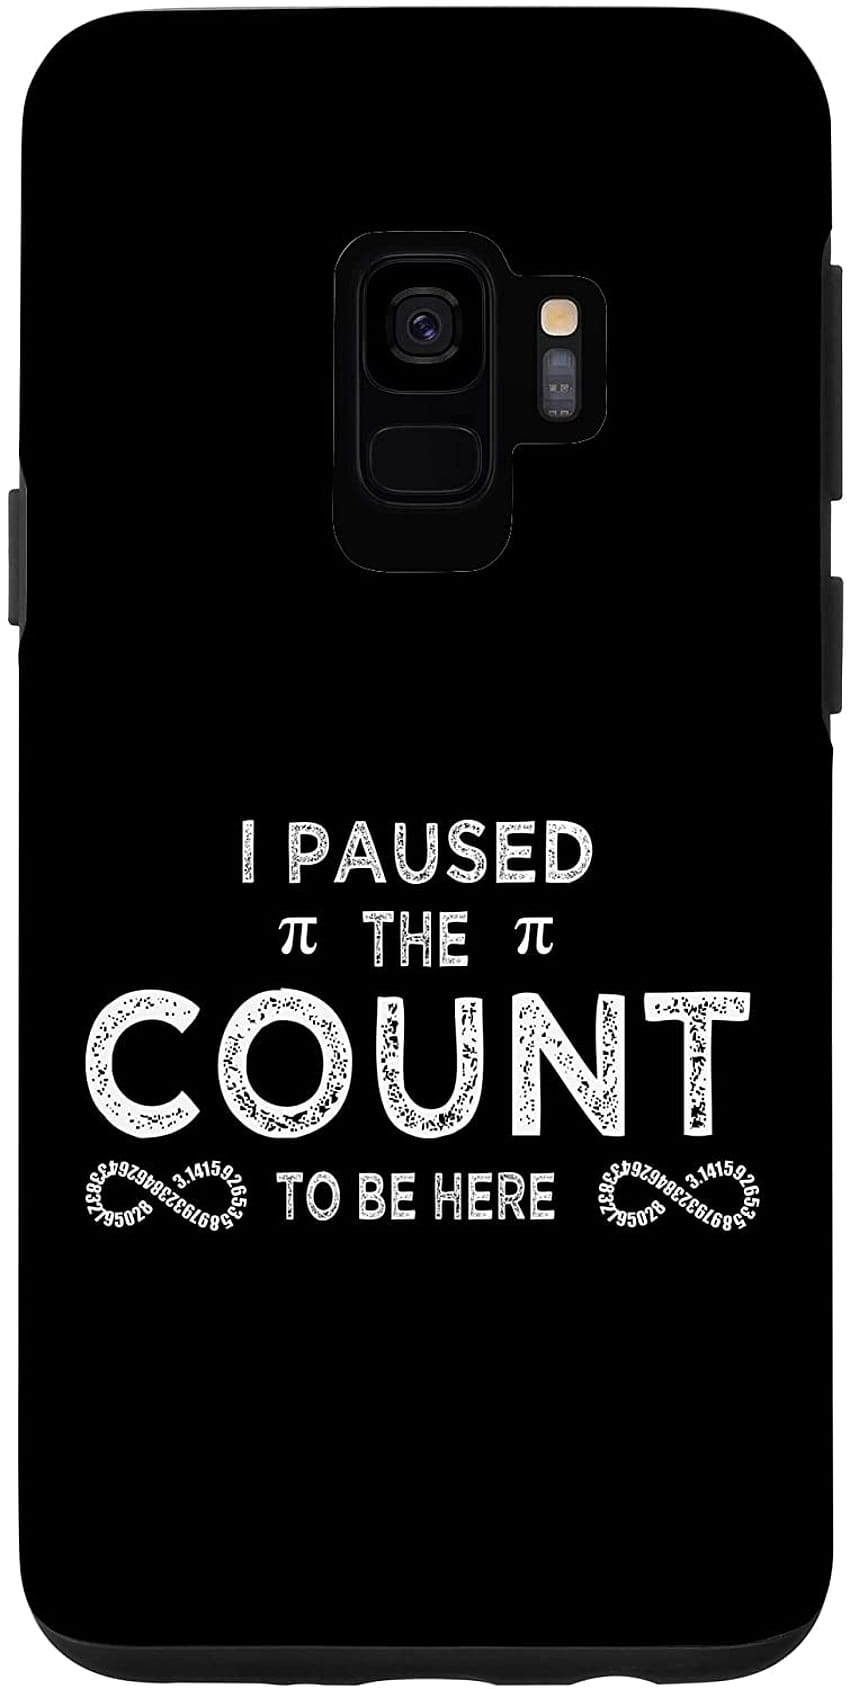 Galaxy S PI In Math 3,14 Number Symbol For Math Teacher Case : Cell Phones & Accessories HD phone wallpaper